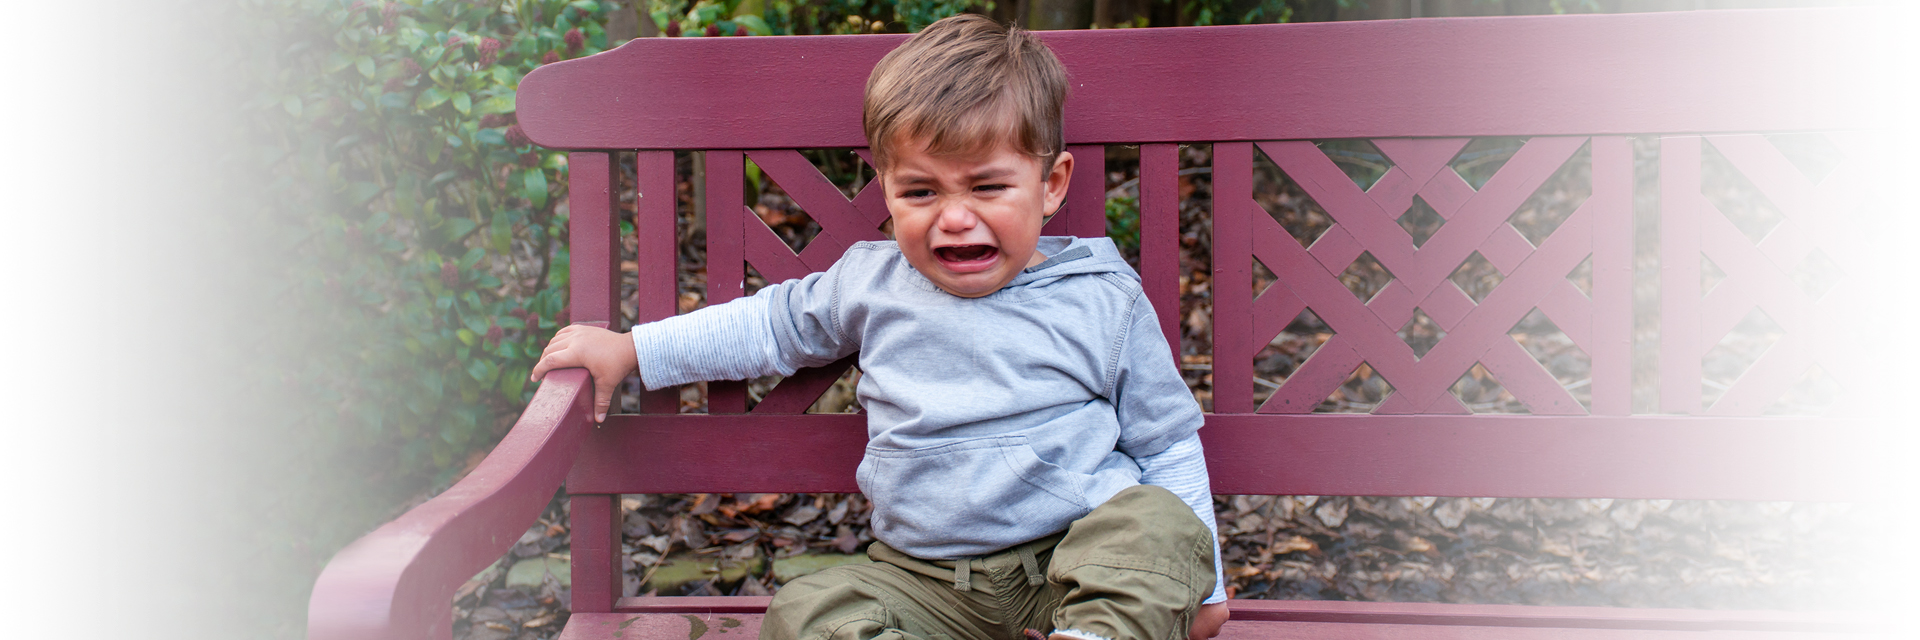 Little boy crying on bench